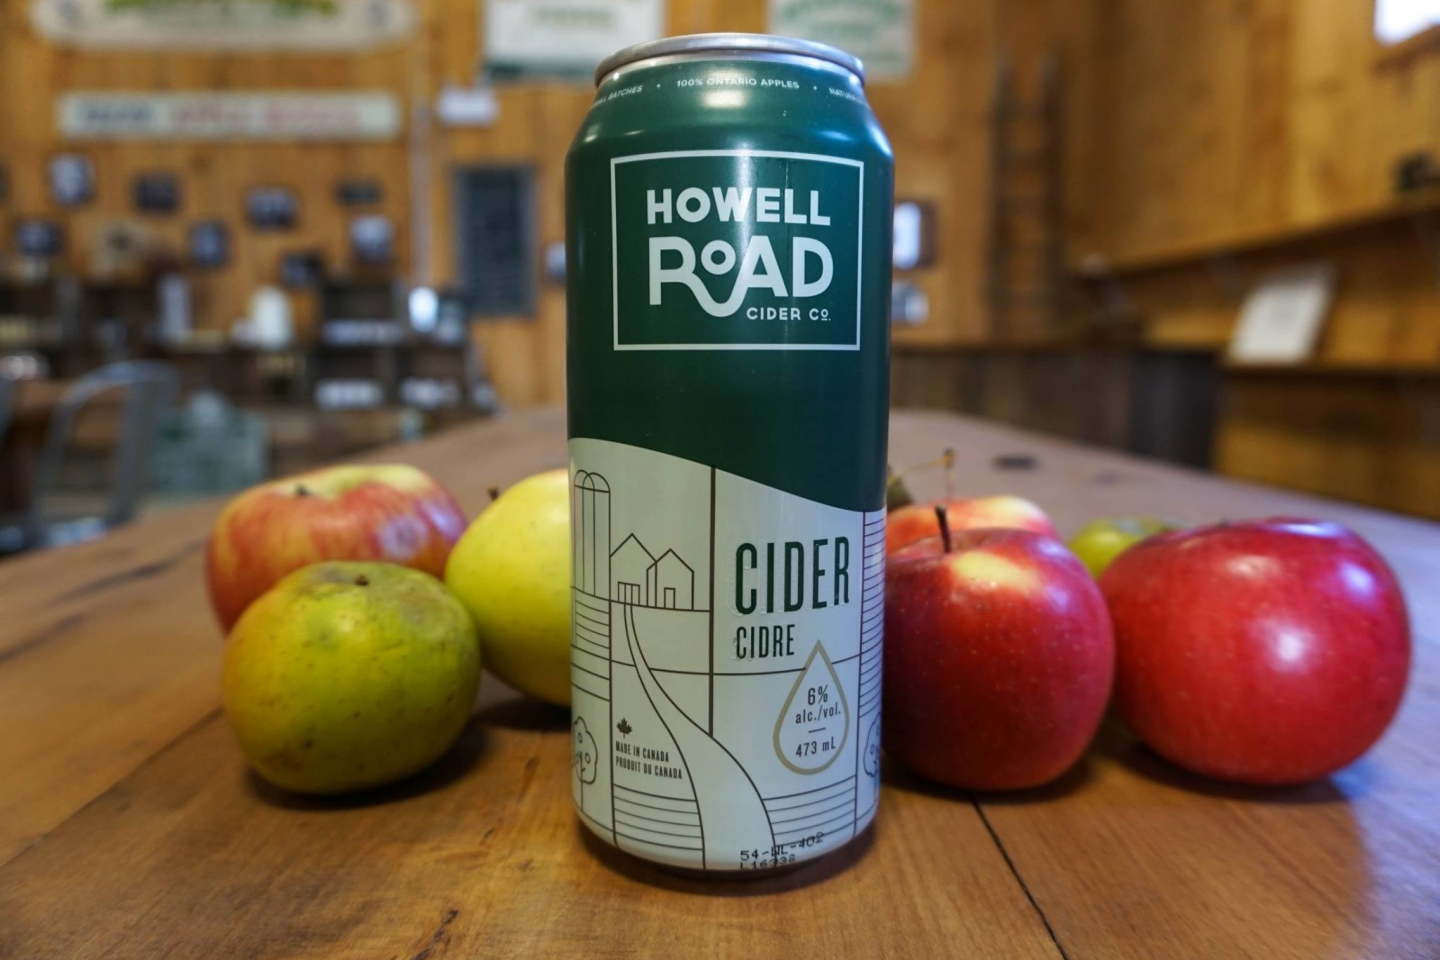 Howell Road Cider Co.